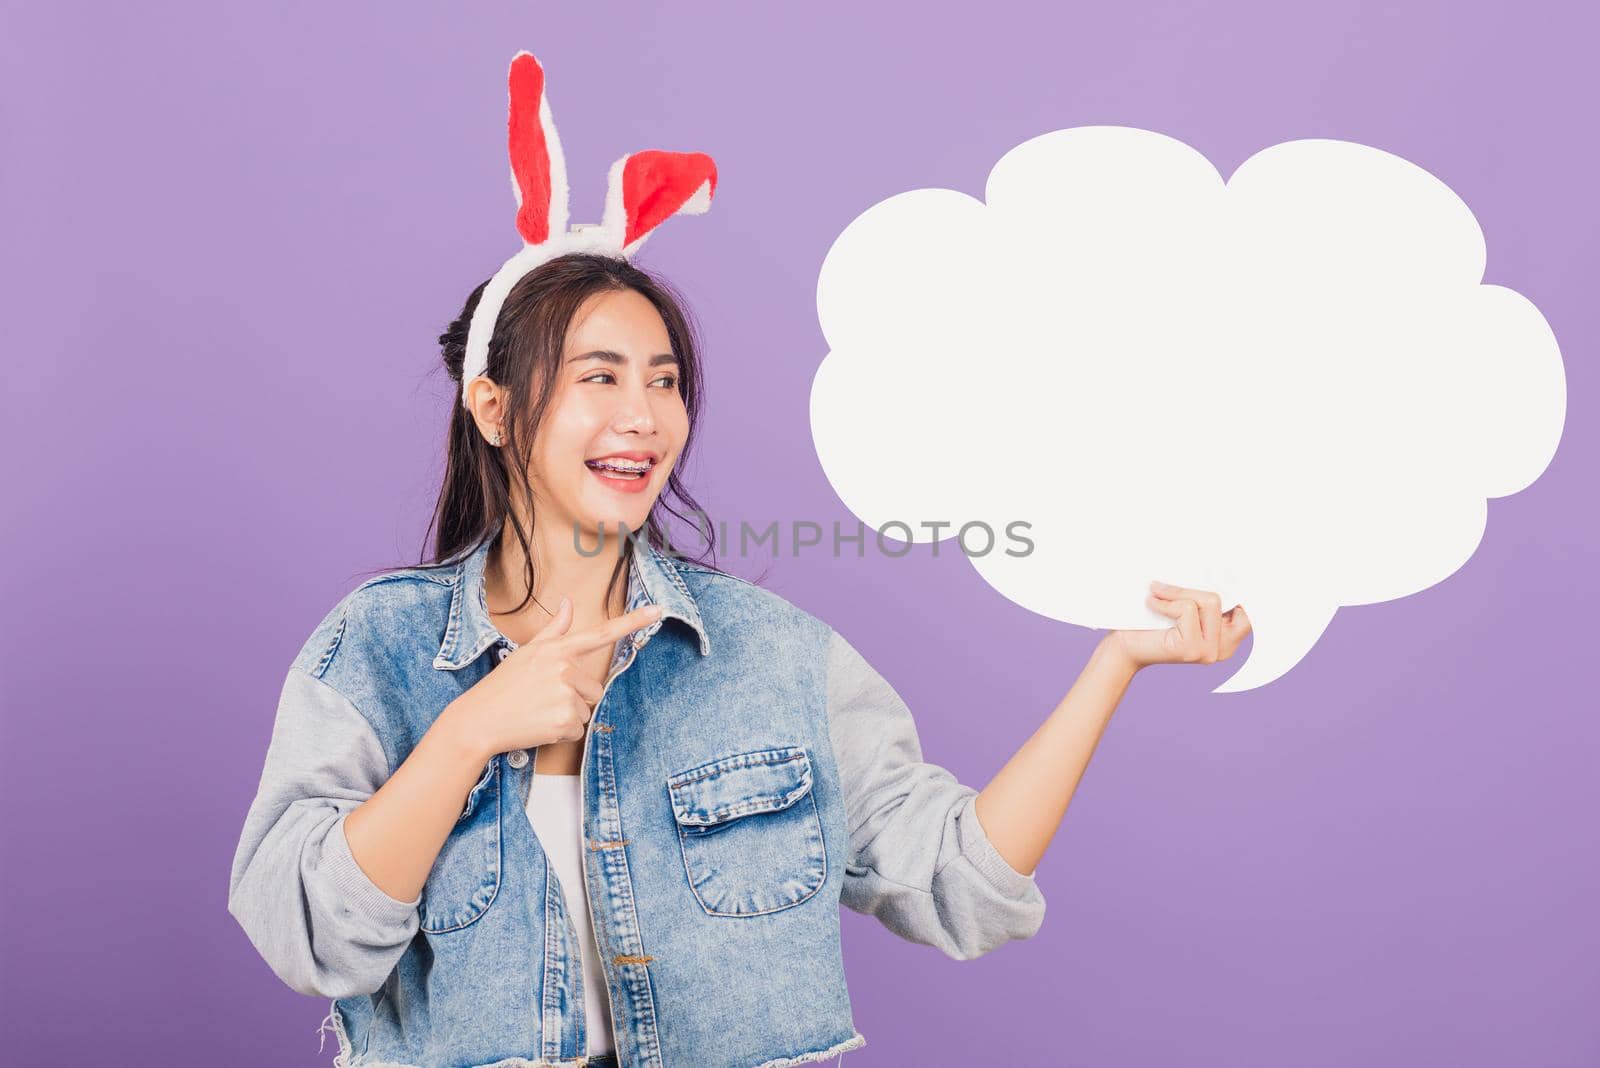 woman smiling excited wearing rabbit ears and denims holding empty speech bubble by Sorapop